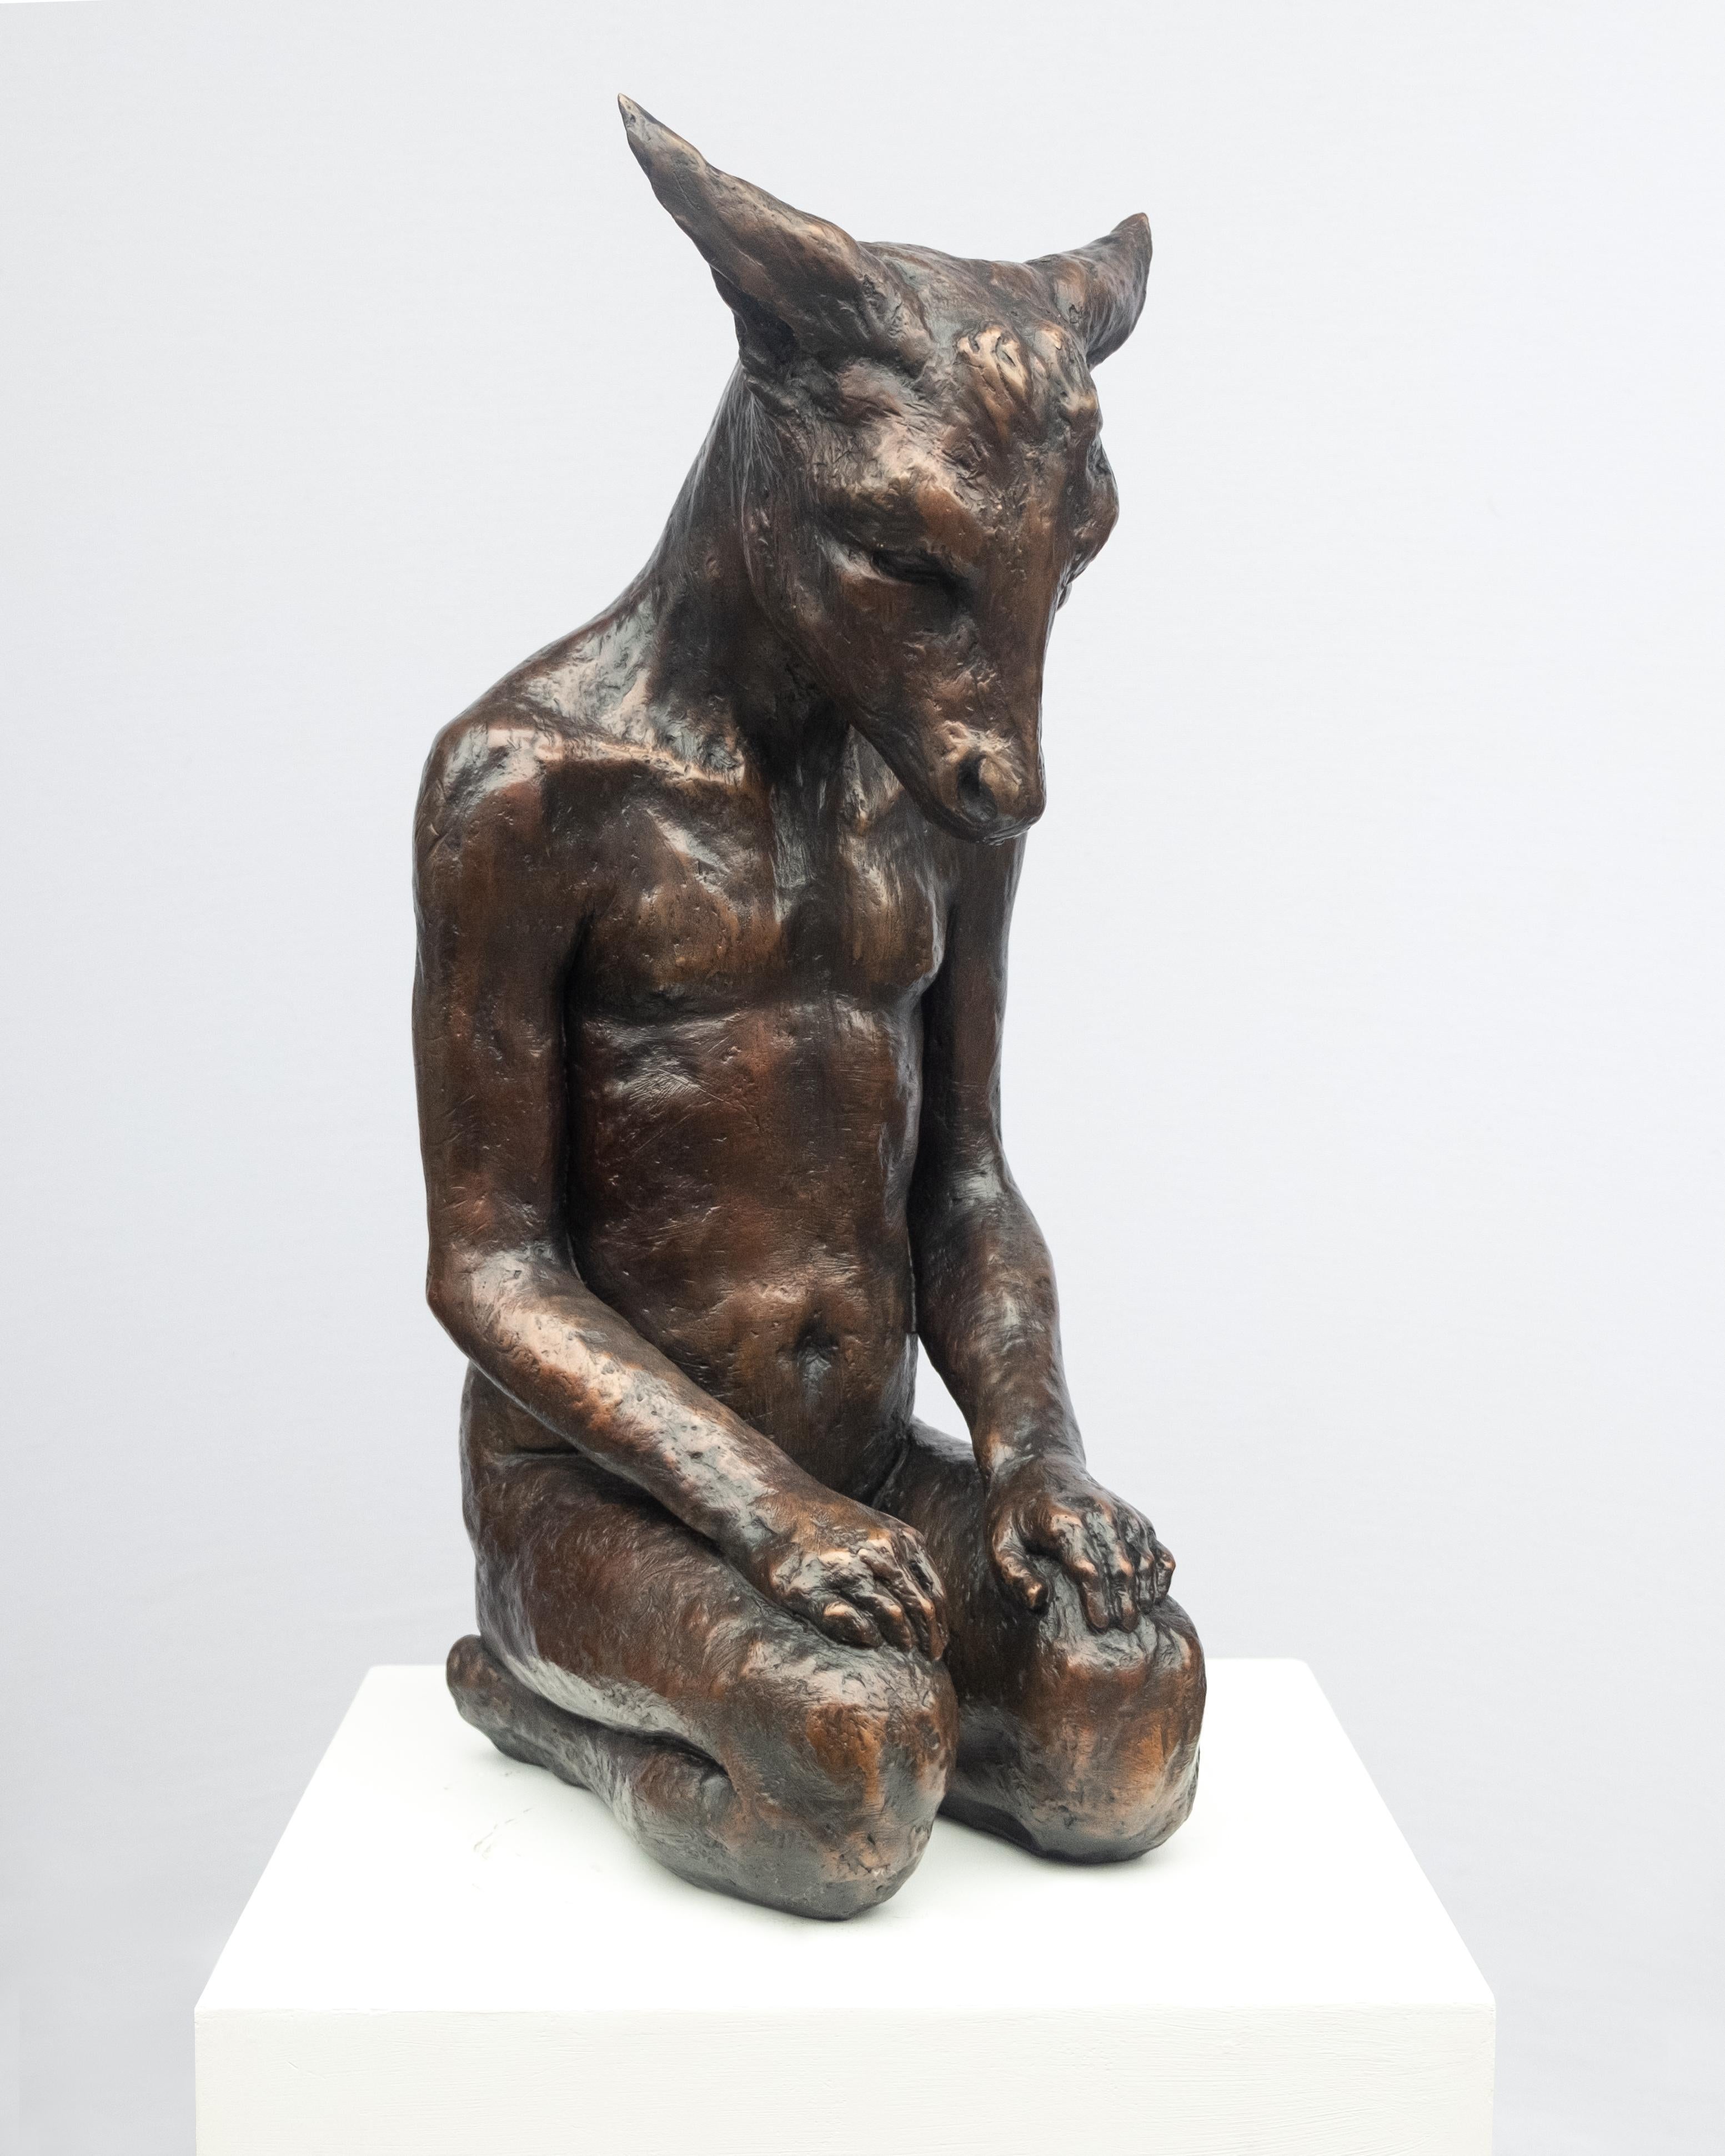 Beth Carter is an artist based in Bristol, UK. She has studied sculptural mythology and methodology in Gambia, India, Kenya, Mexico, New Zealand, Sri Lanka, and Tanzania. Her practice often morphs the human figure and animal, creating totemic